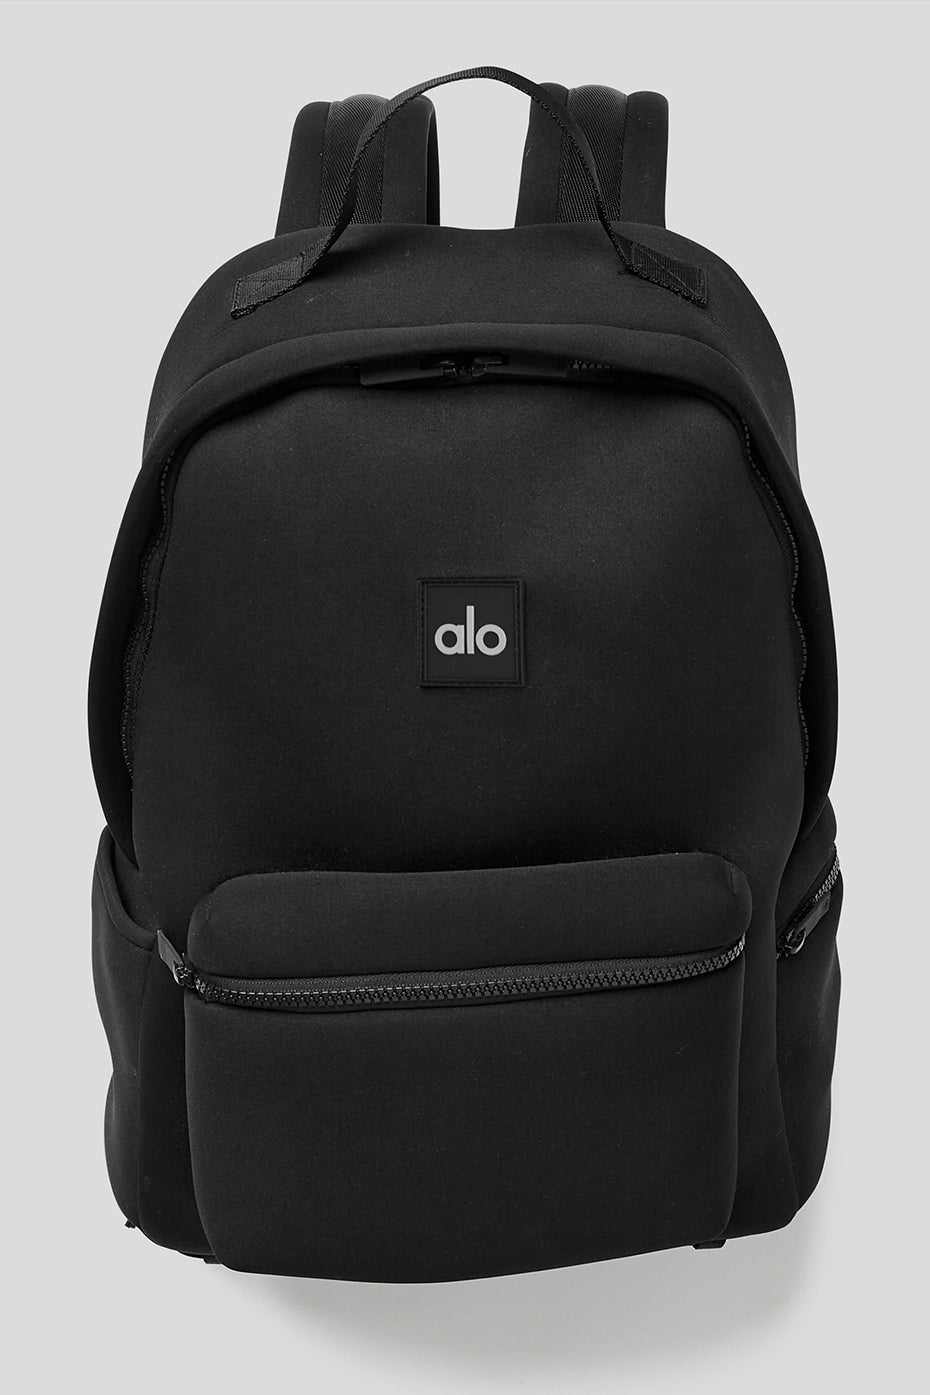 Alo Yoga Tote Multiple - $28 (44% Off Retail) New With Tags - From